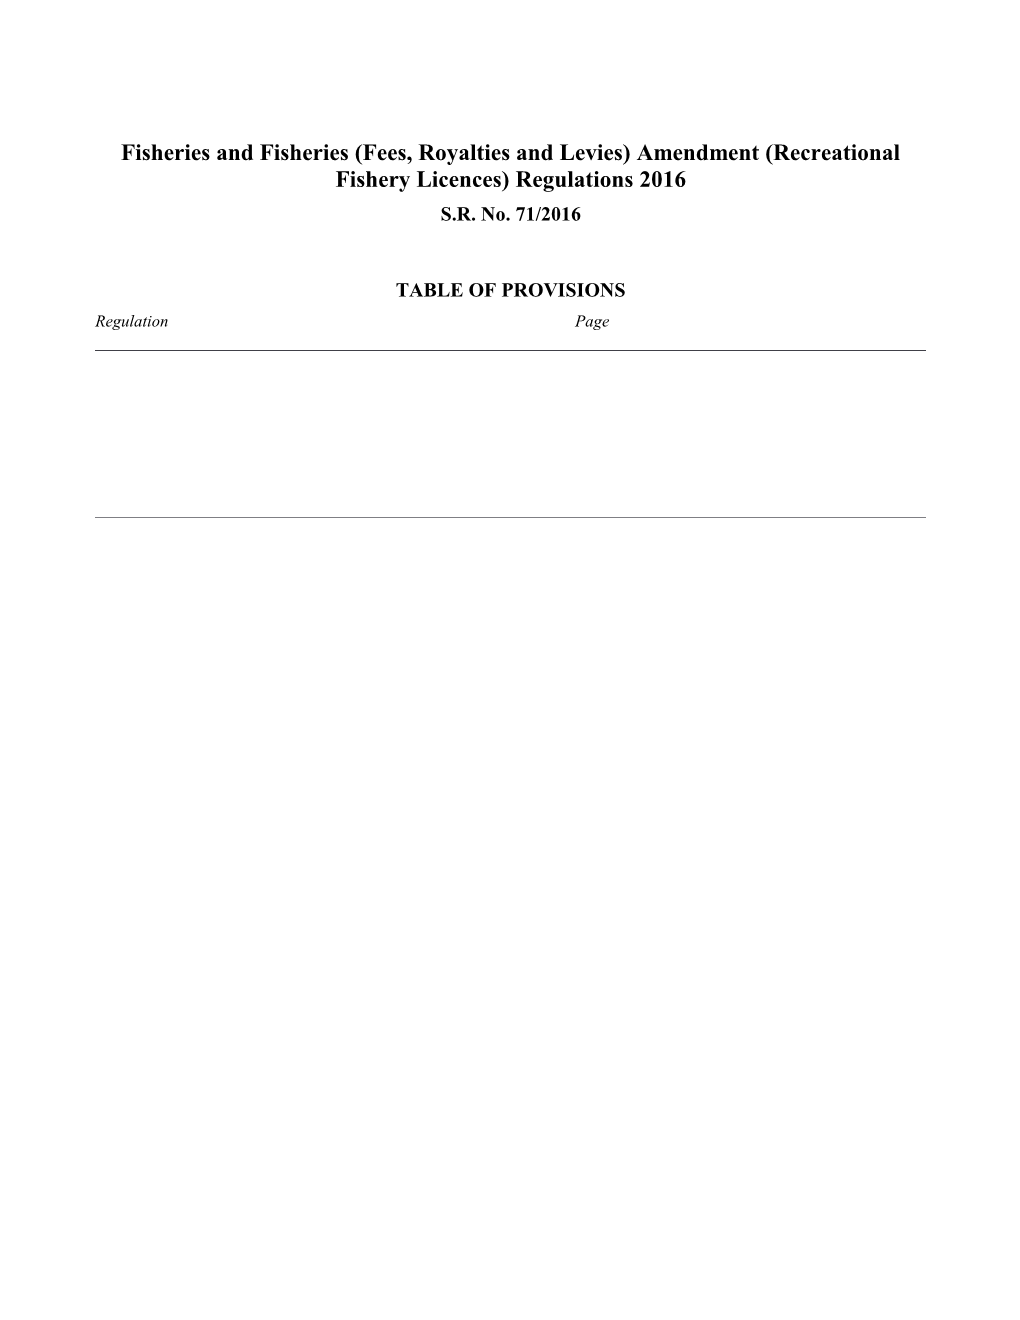 Fisheries and Fisheries (Fees, Royalties and Levies) Amendment (Recreational Fishery Licences)